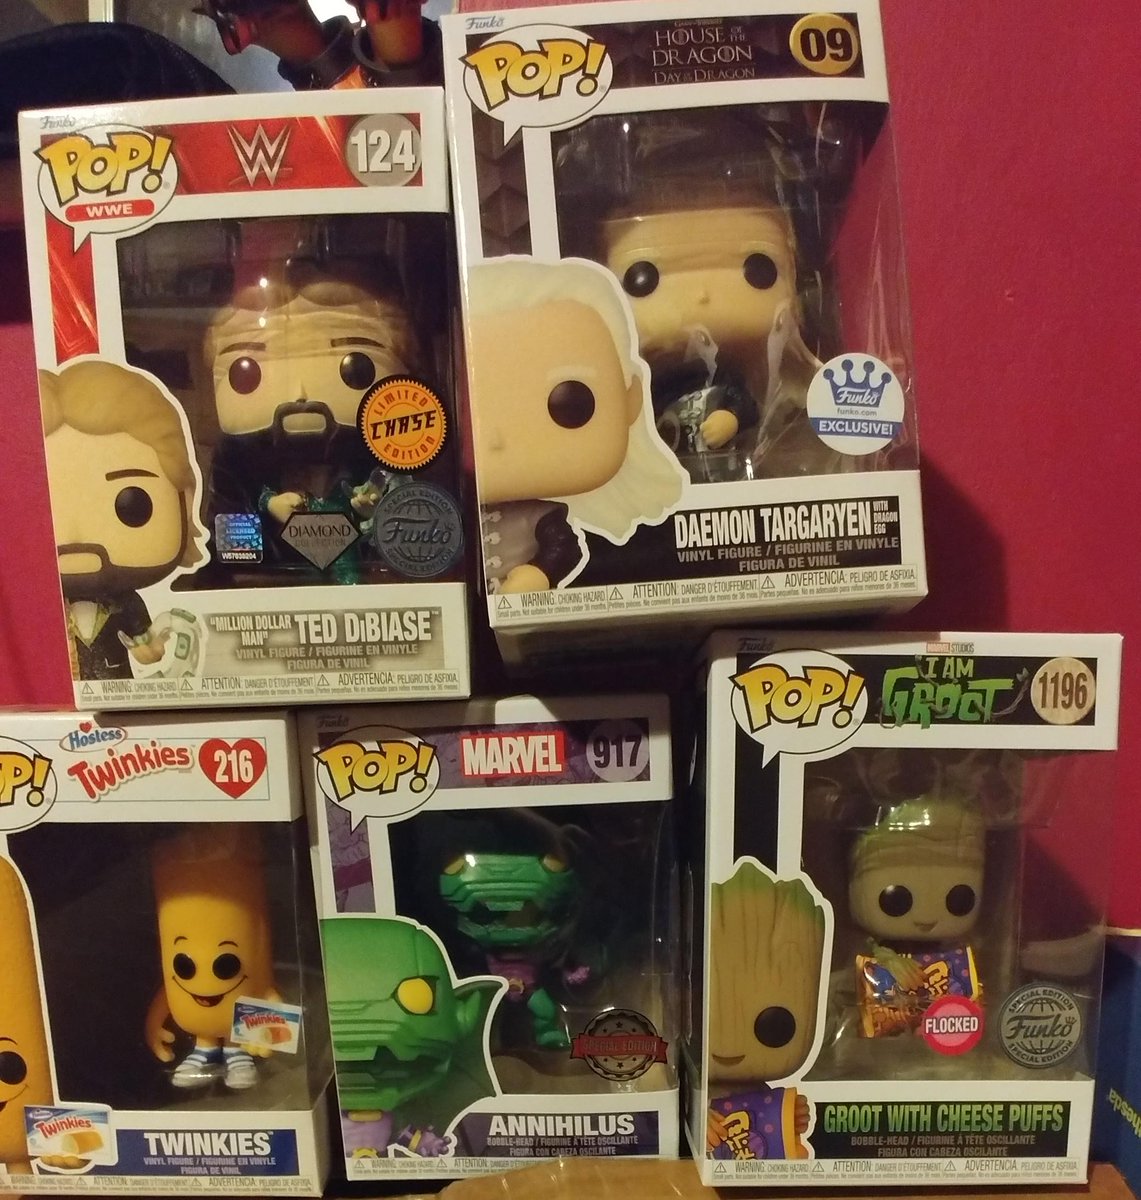 Latest #Funko haul courtesy of @FunkoEurope (thank you!), landed the #TedDiBiase #chase and the #DaemonTargaryen finally completes the @HouseofDragon
collection!